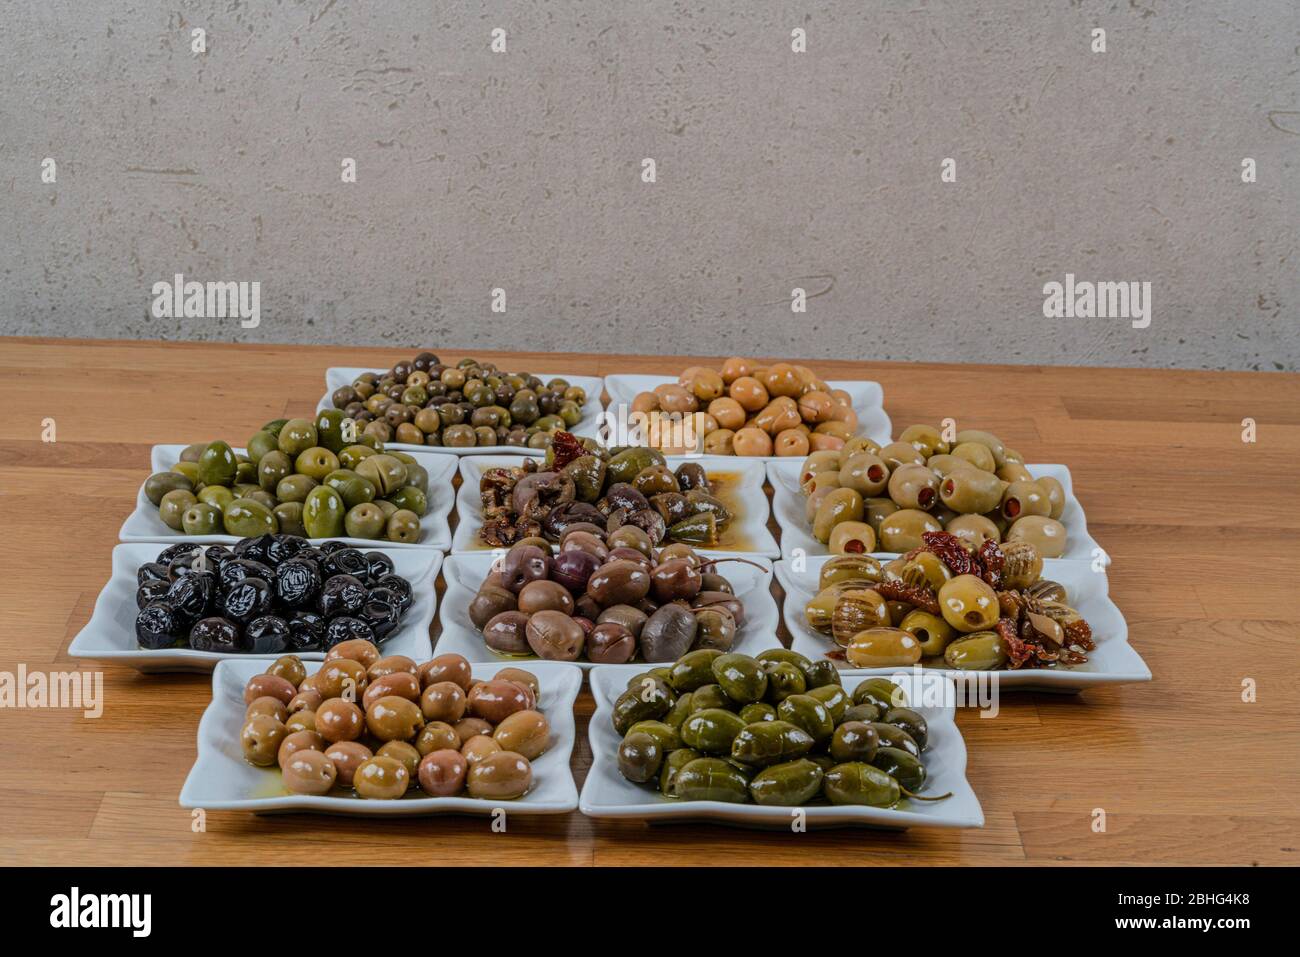 Olives assortment in bowl with oil. Stock Photo